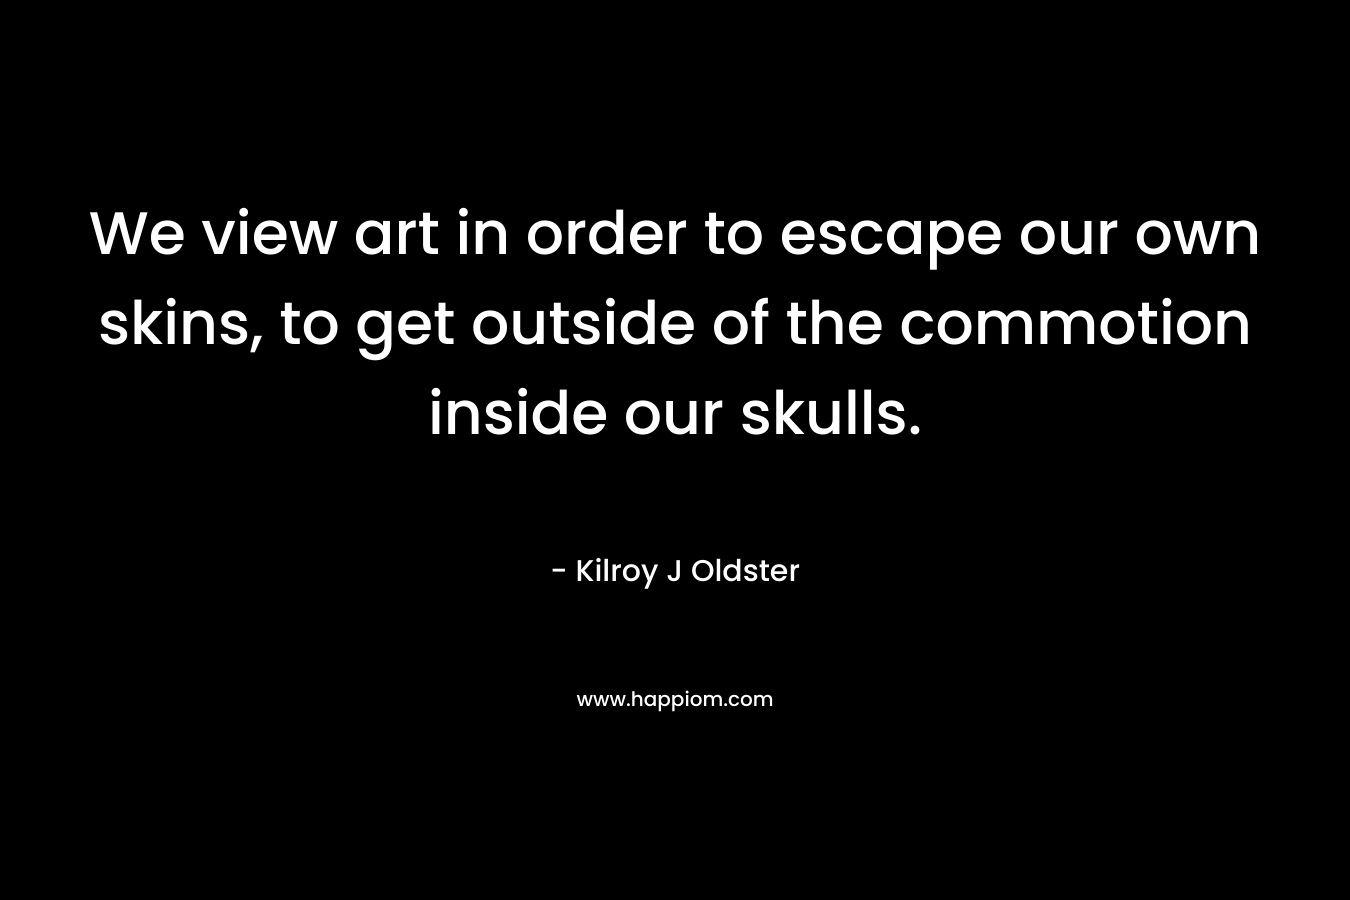 We view art in order to escape our own skins, to get outside of the commotion inside our skulls.